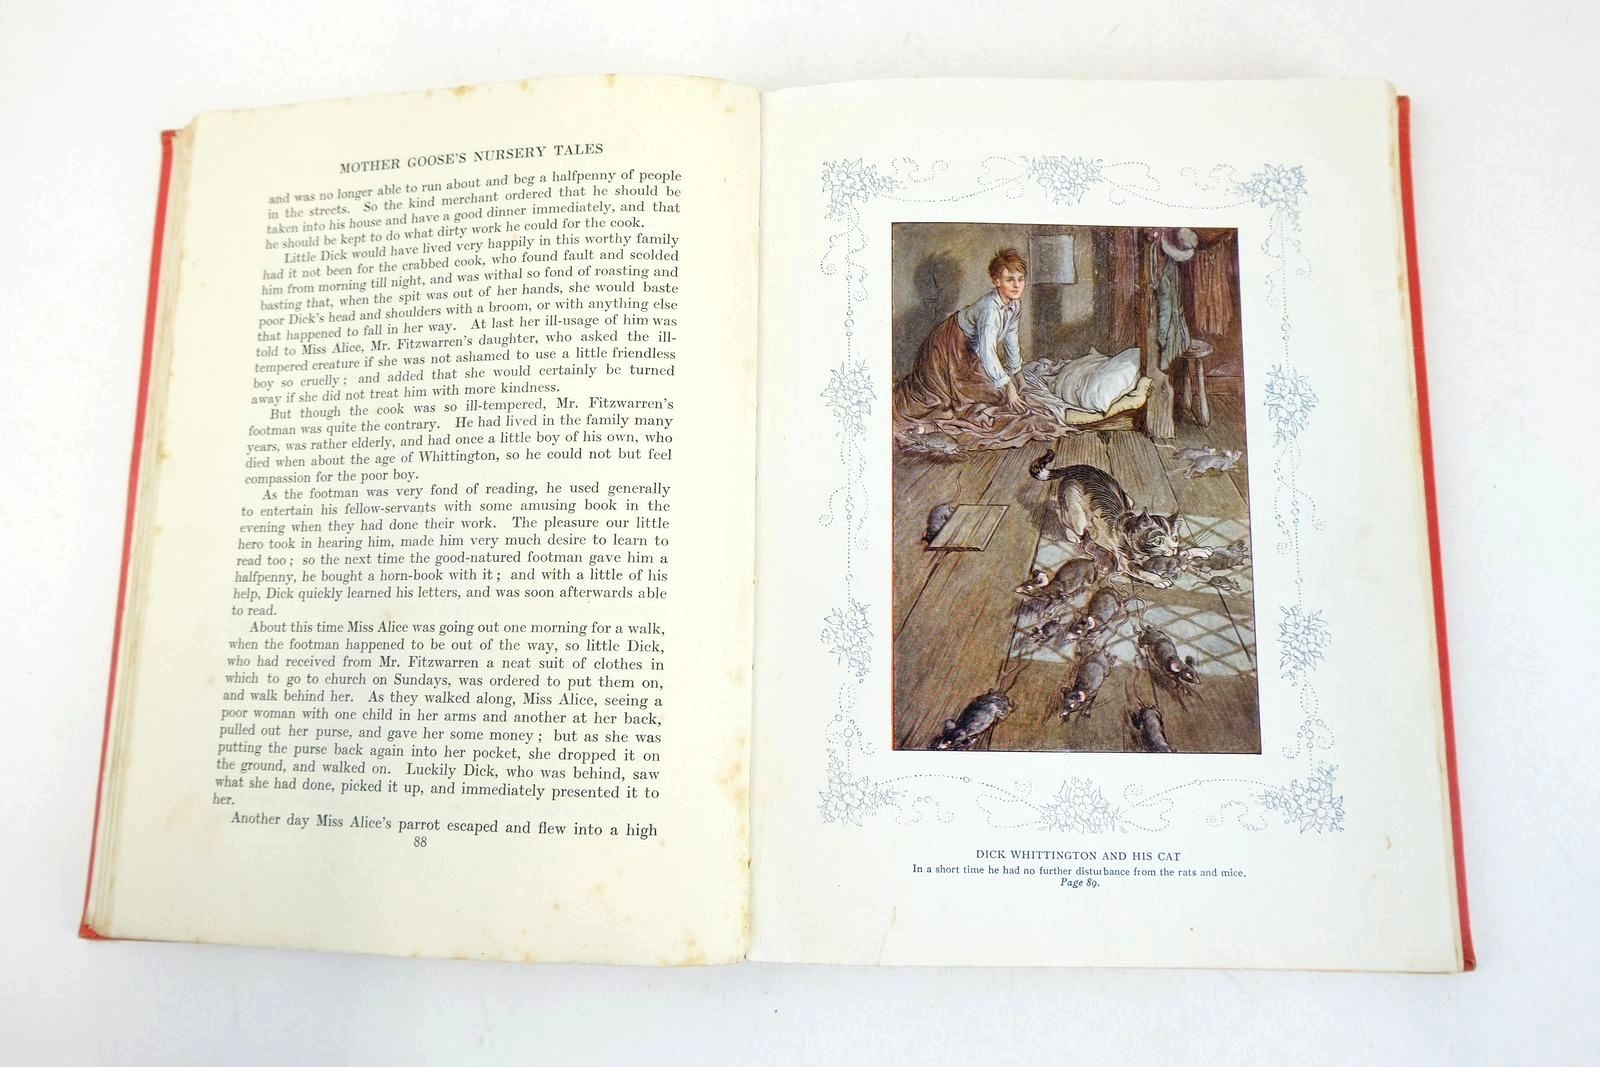 Photo of MOTHER GOOSE'S NURSERY TALES written by Walter, L. Edna illustrated by Folkard, Charles
Hartley, J.H. published by A. & C. Black Ltd. (STOCK CODE: 1325923)  for sale by Stella & Rose's Books